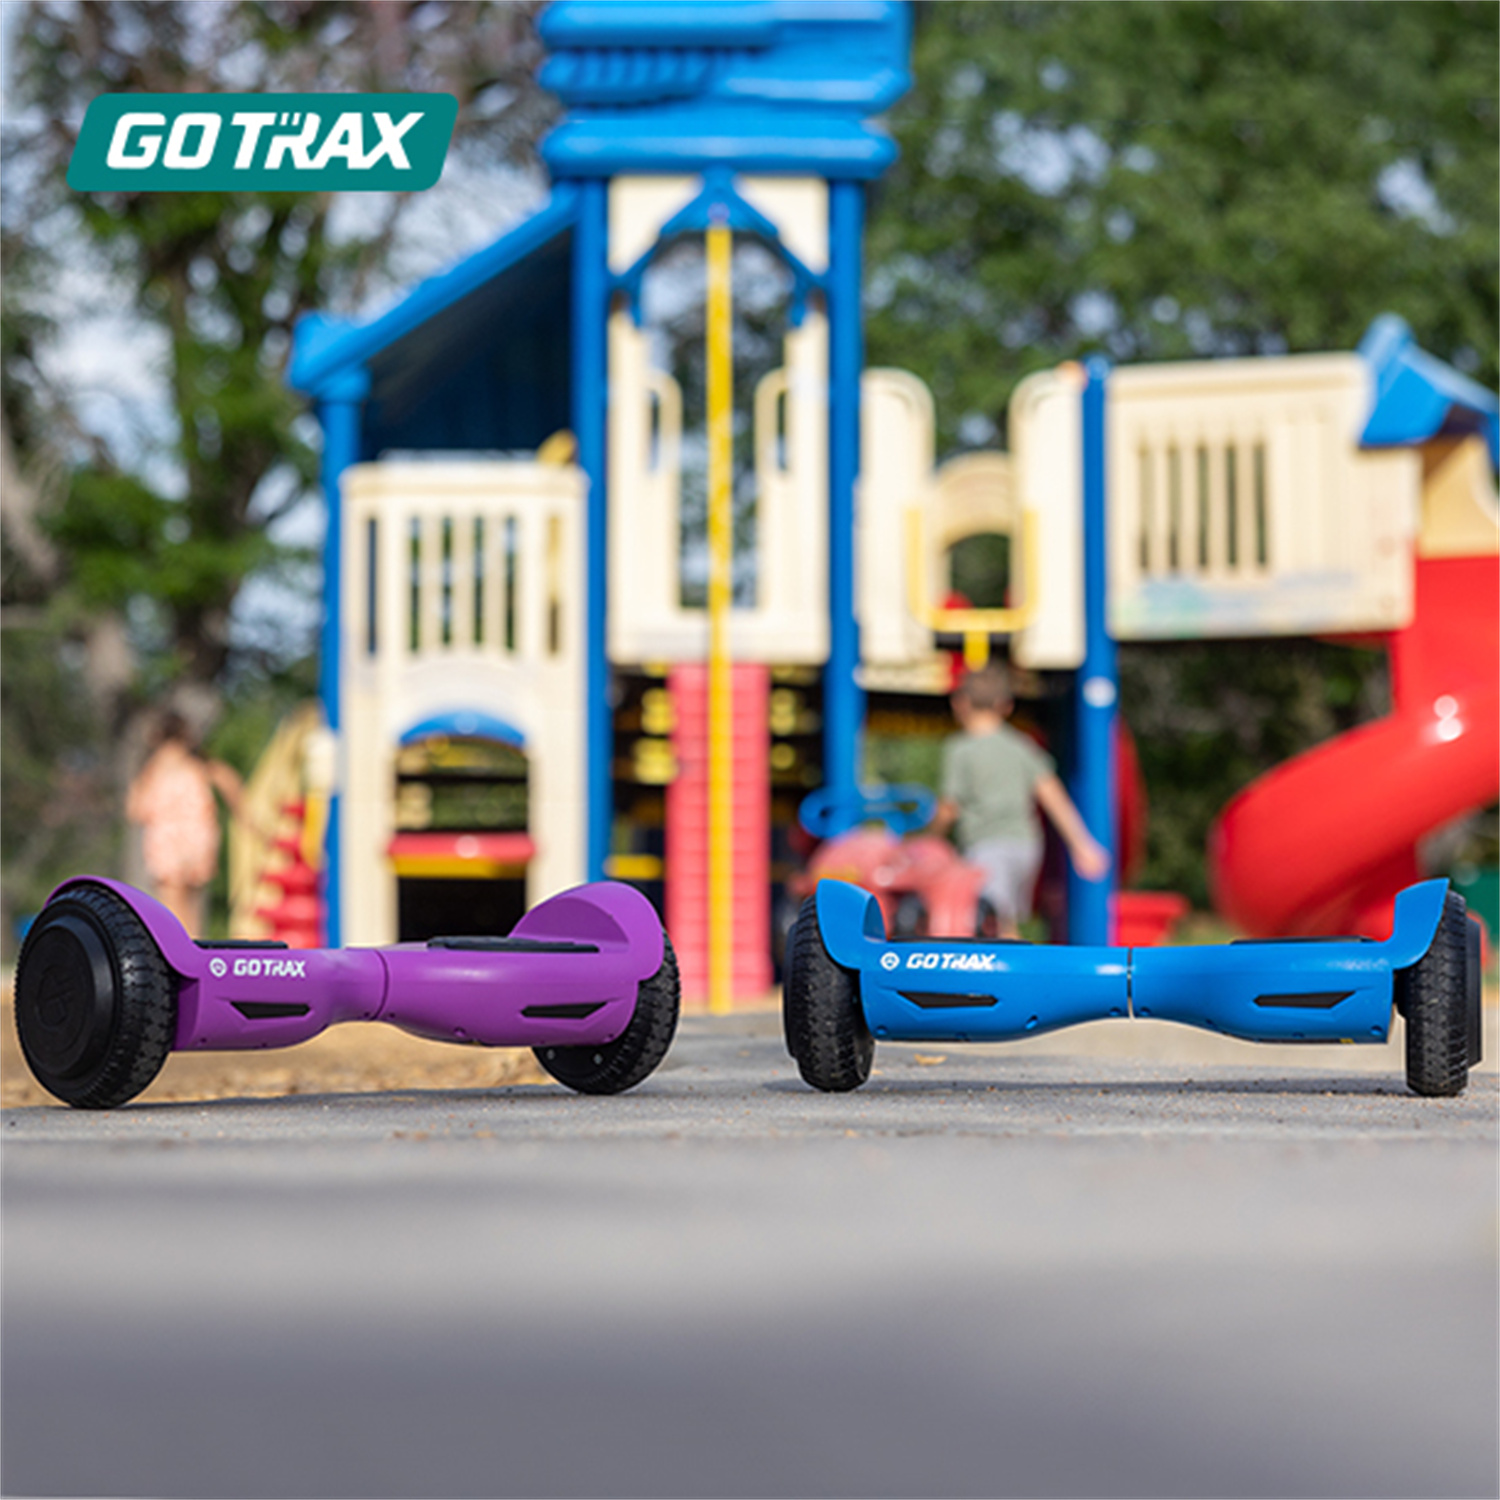 GOTRAX Lil Cub Hoverboard 6.5" Wheels, Max 2.5 Miles, 6.2mph Self Balance for 44-88lbs Kids, Purple - image 2 of 11